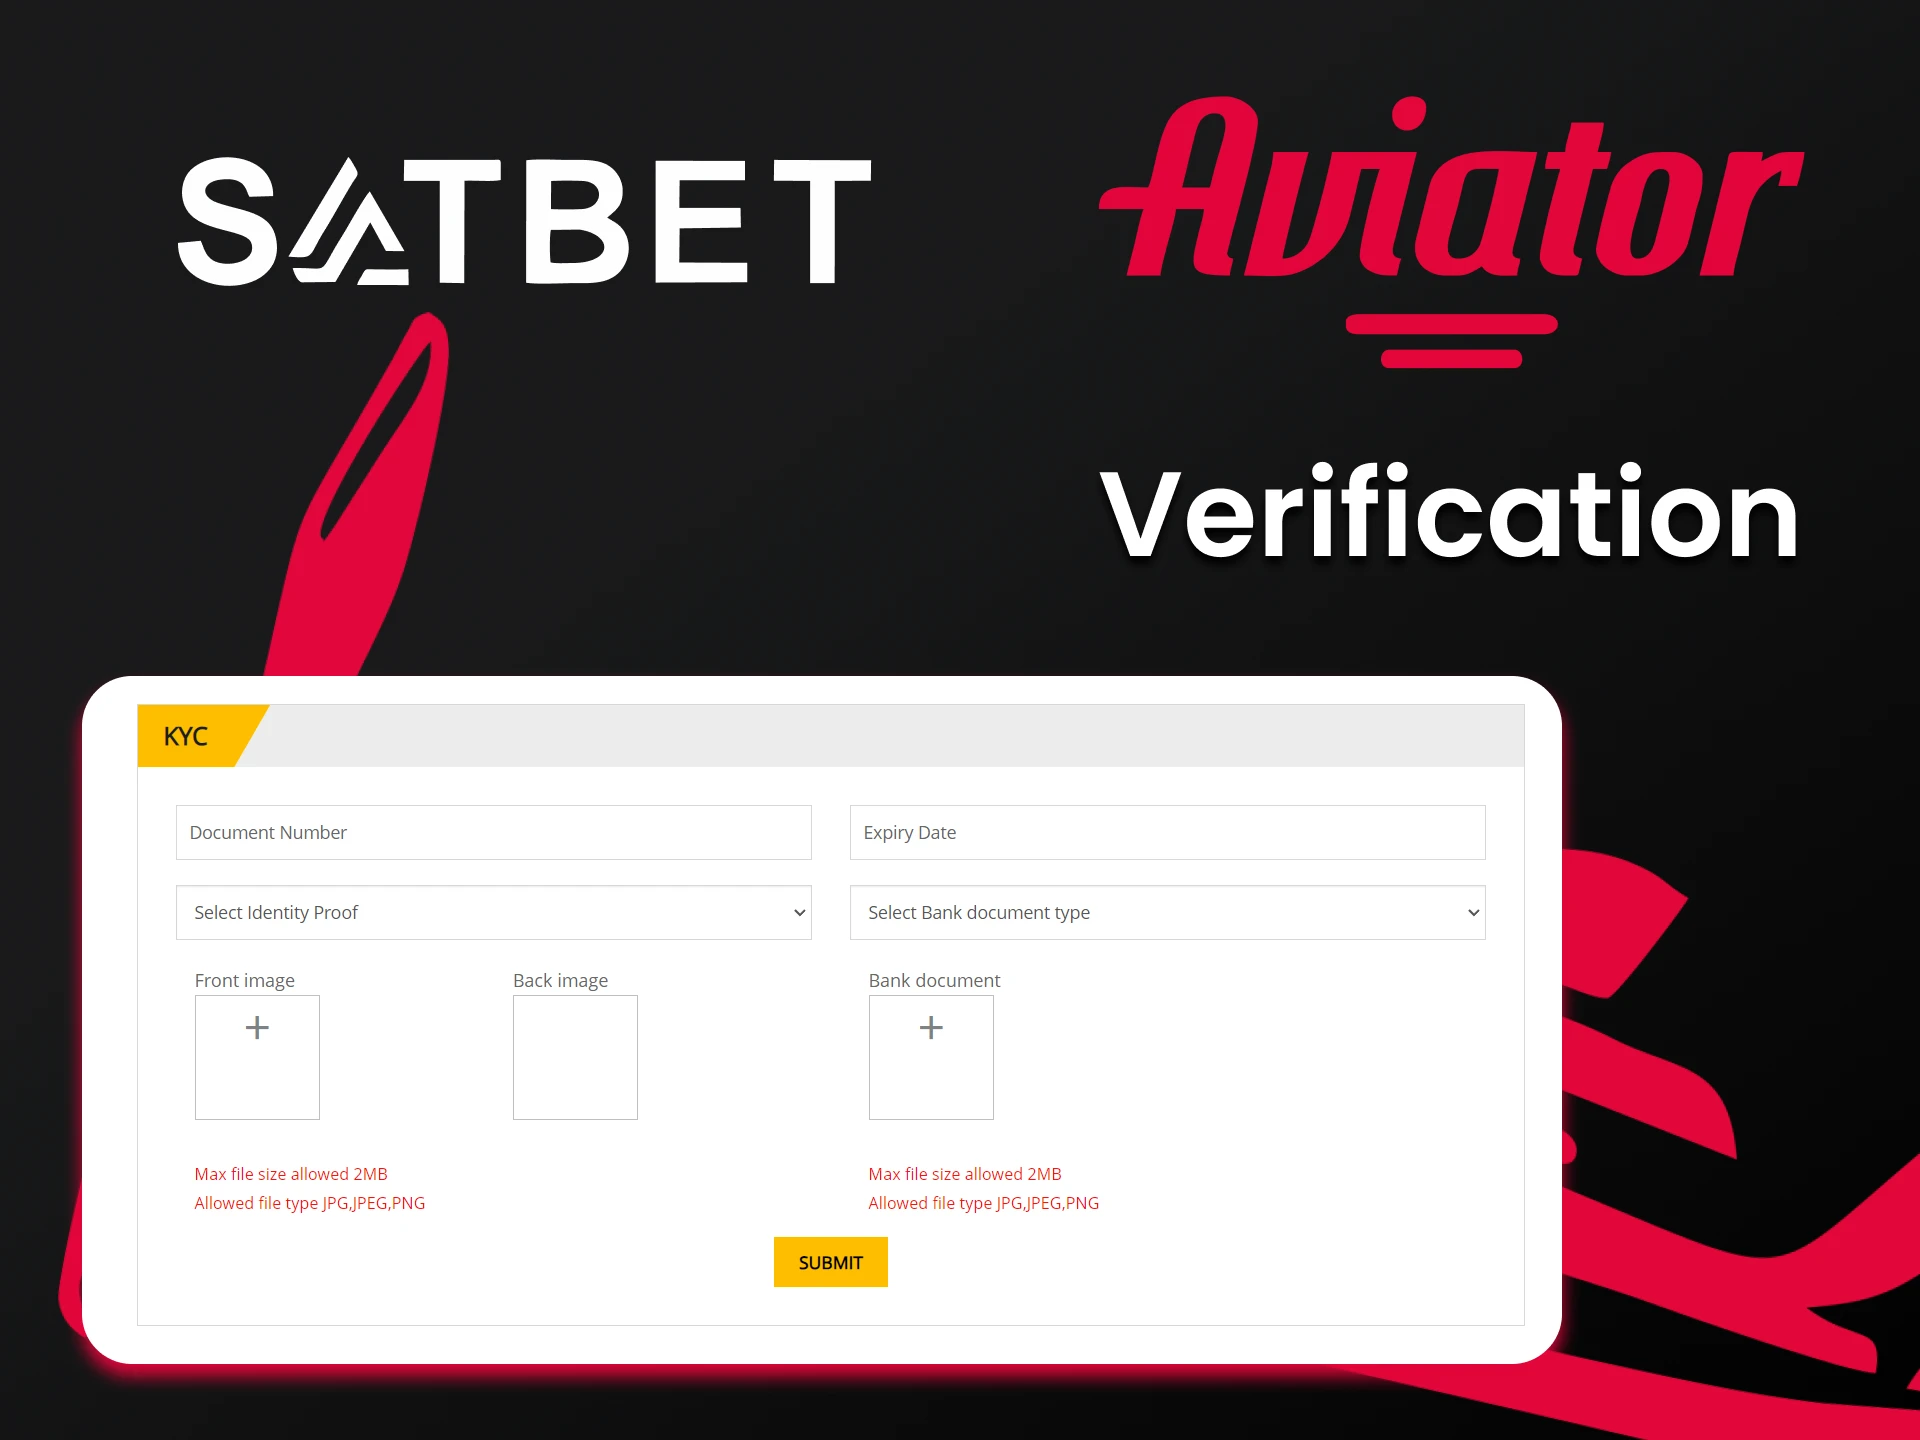 Fill in your personal details for the Satbet site to play Aviator.